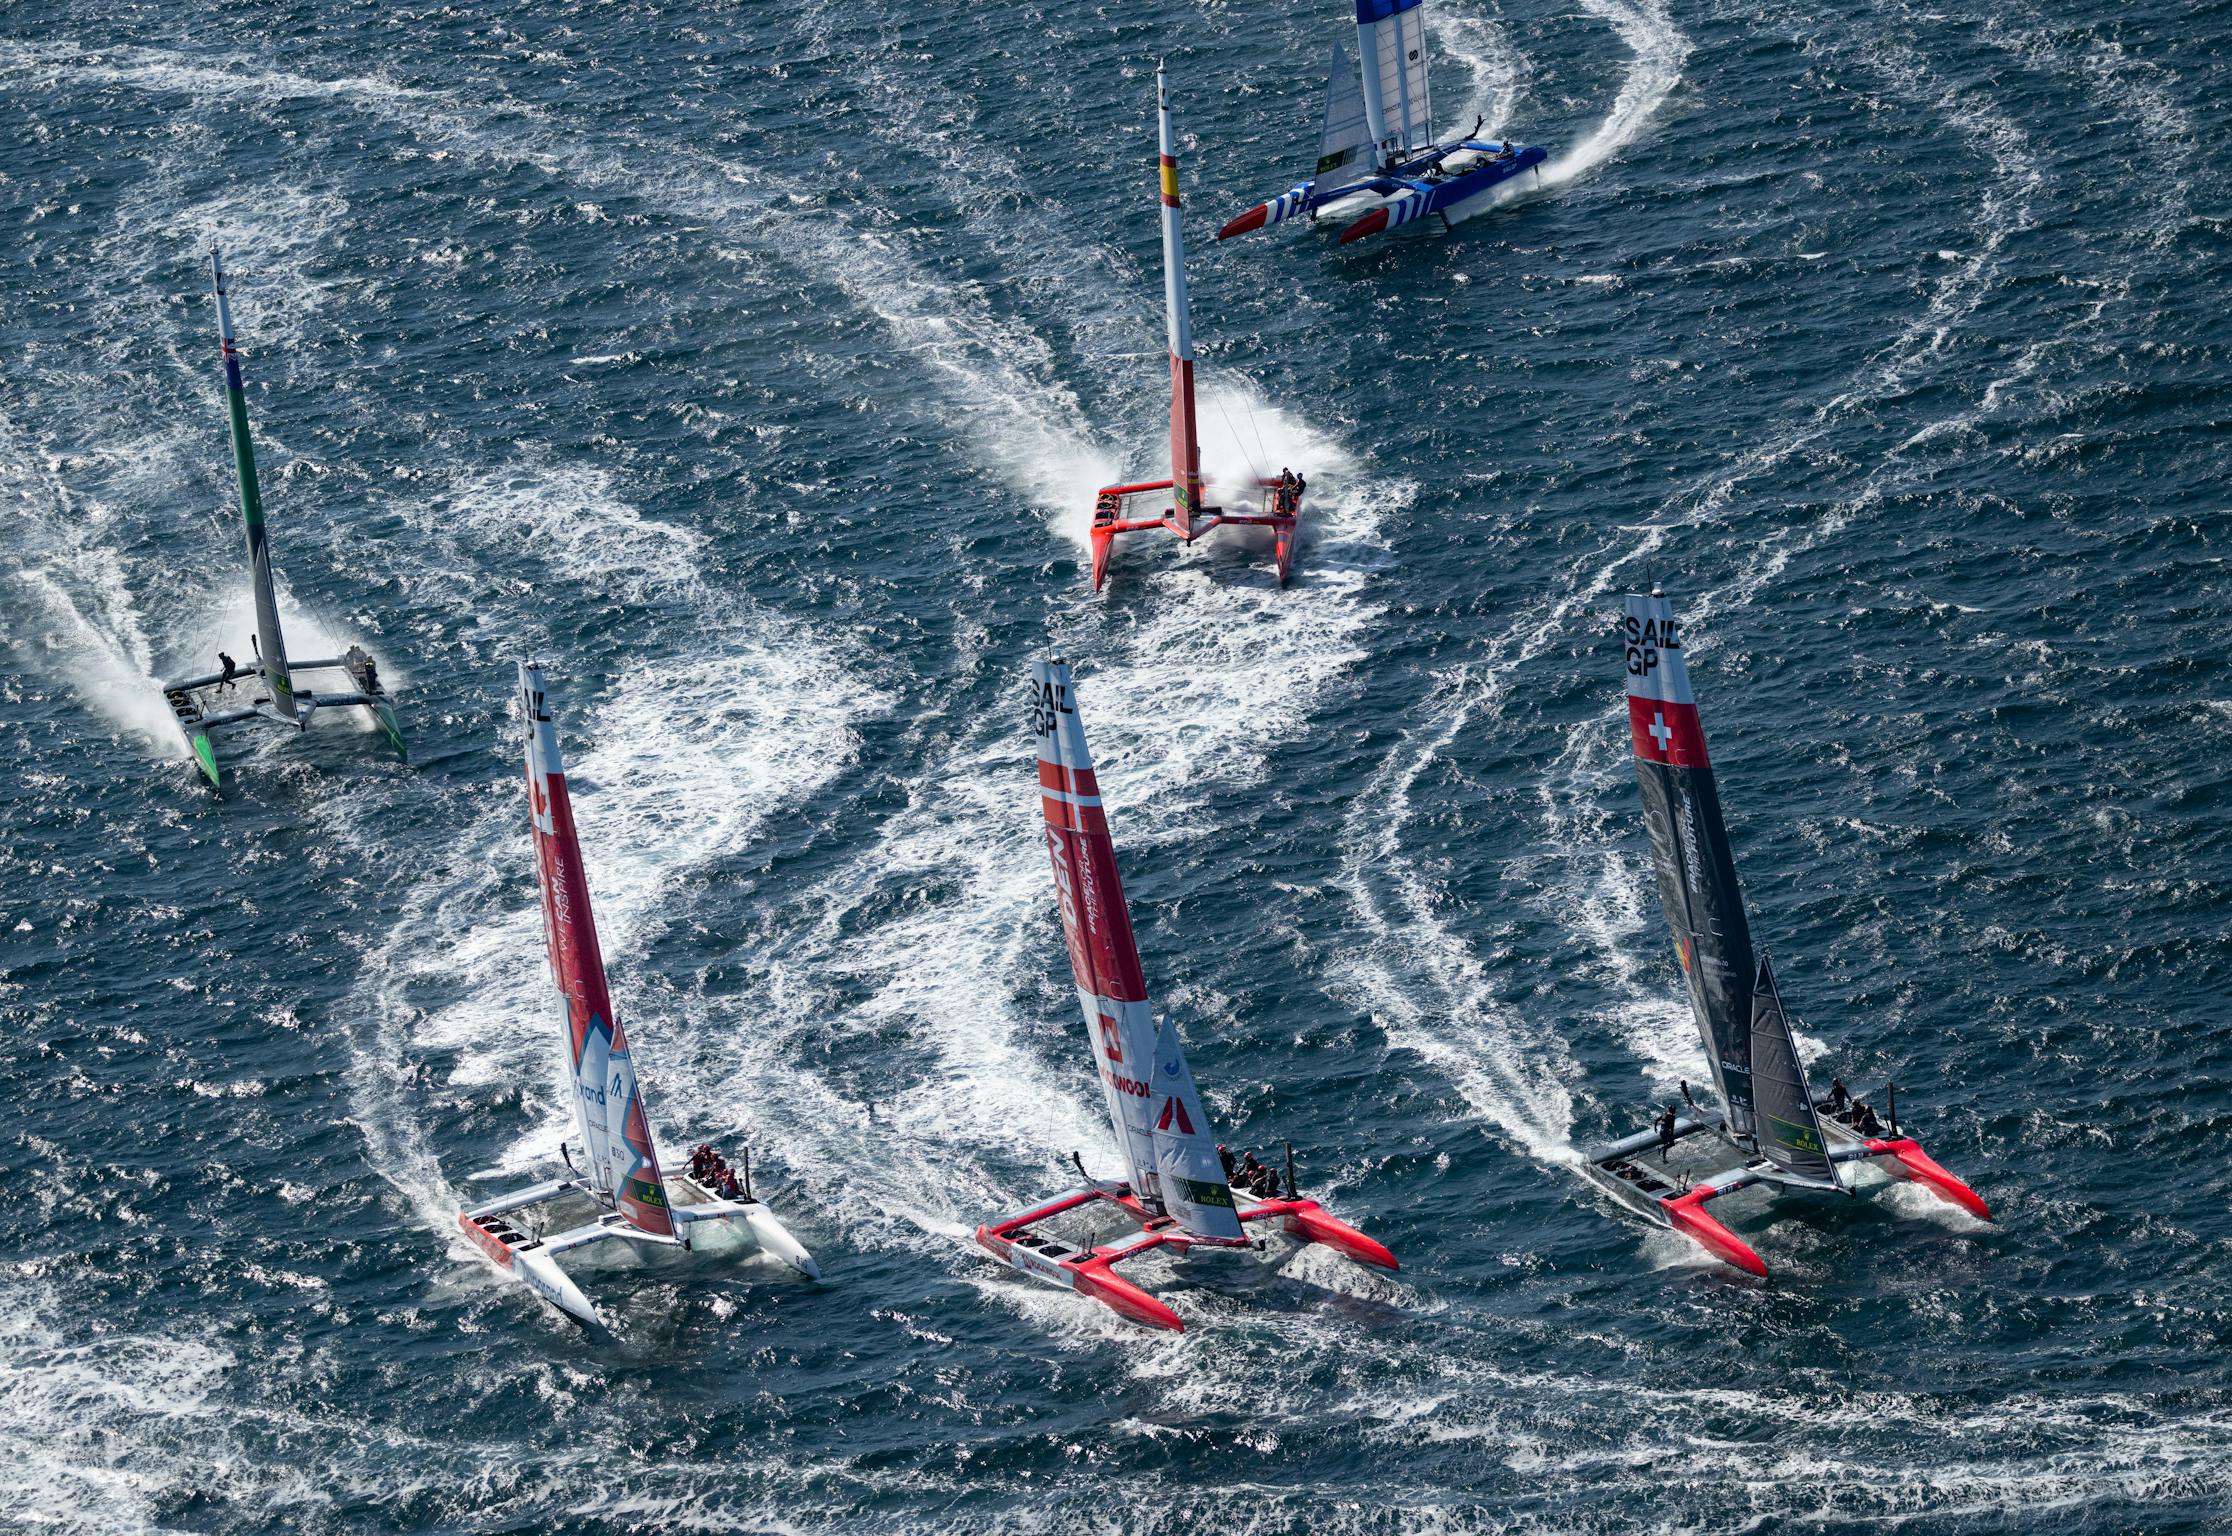 The tightly packed SailGP fleet racing on rough waters in Saint-Tropez.